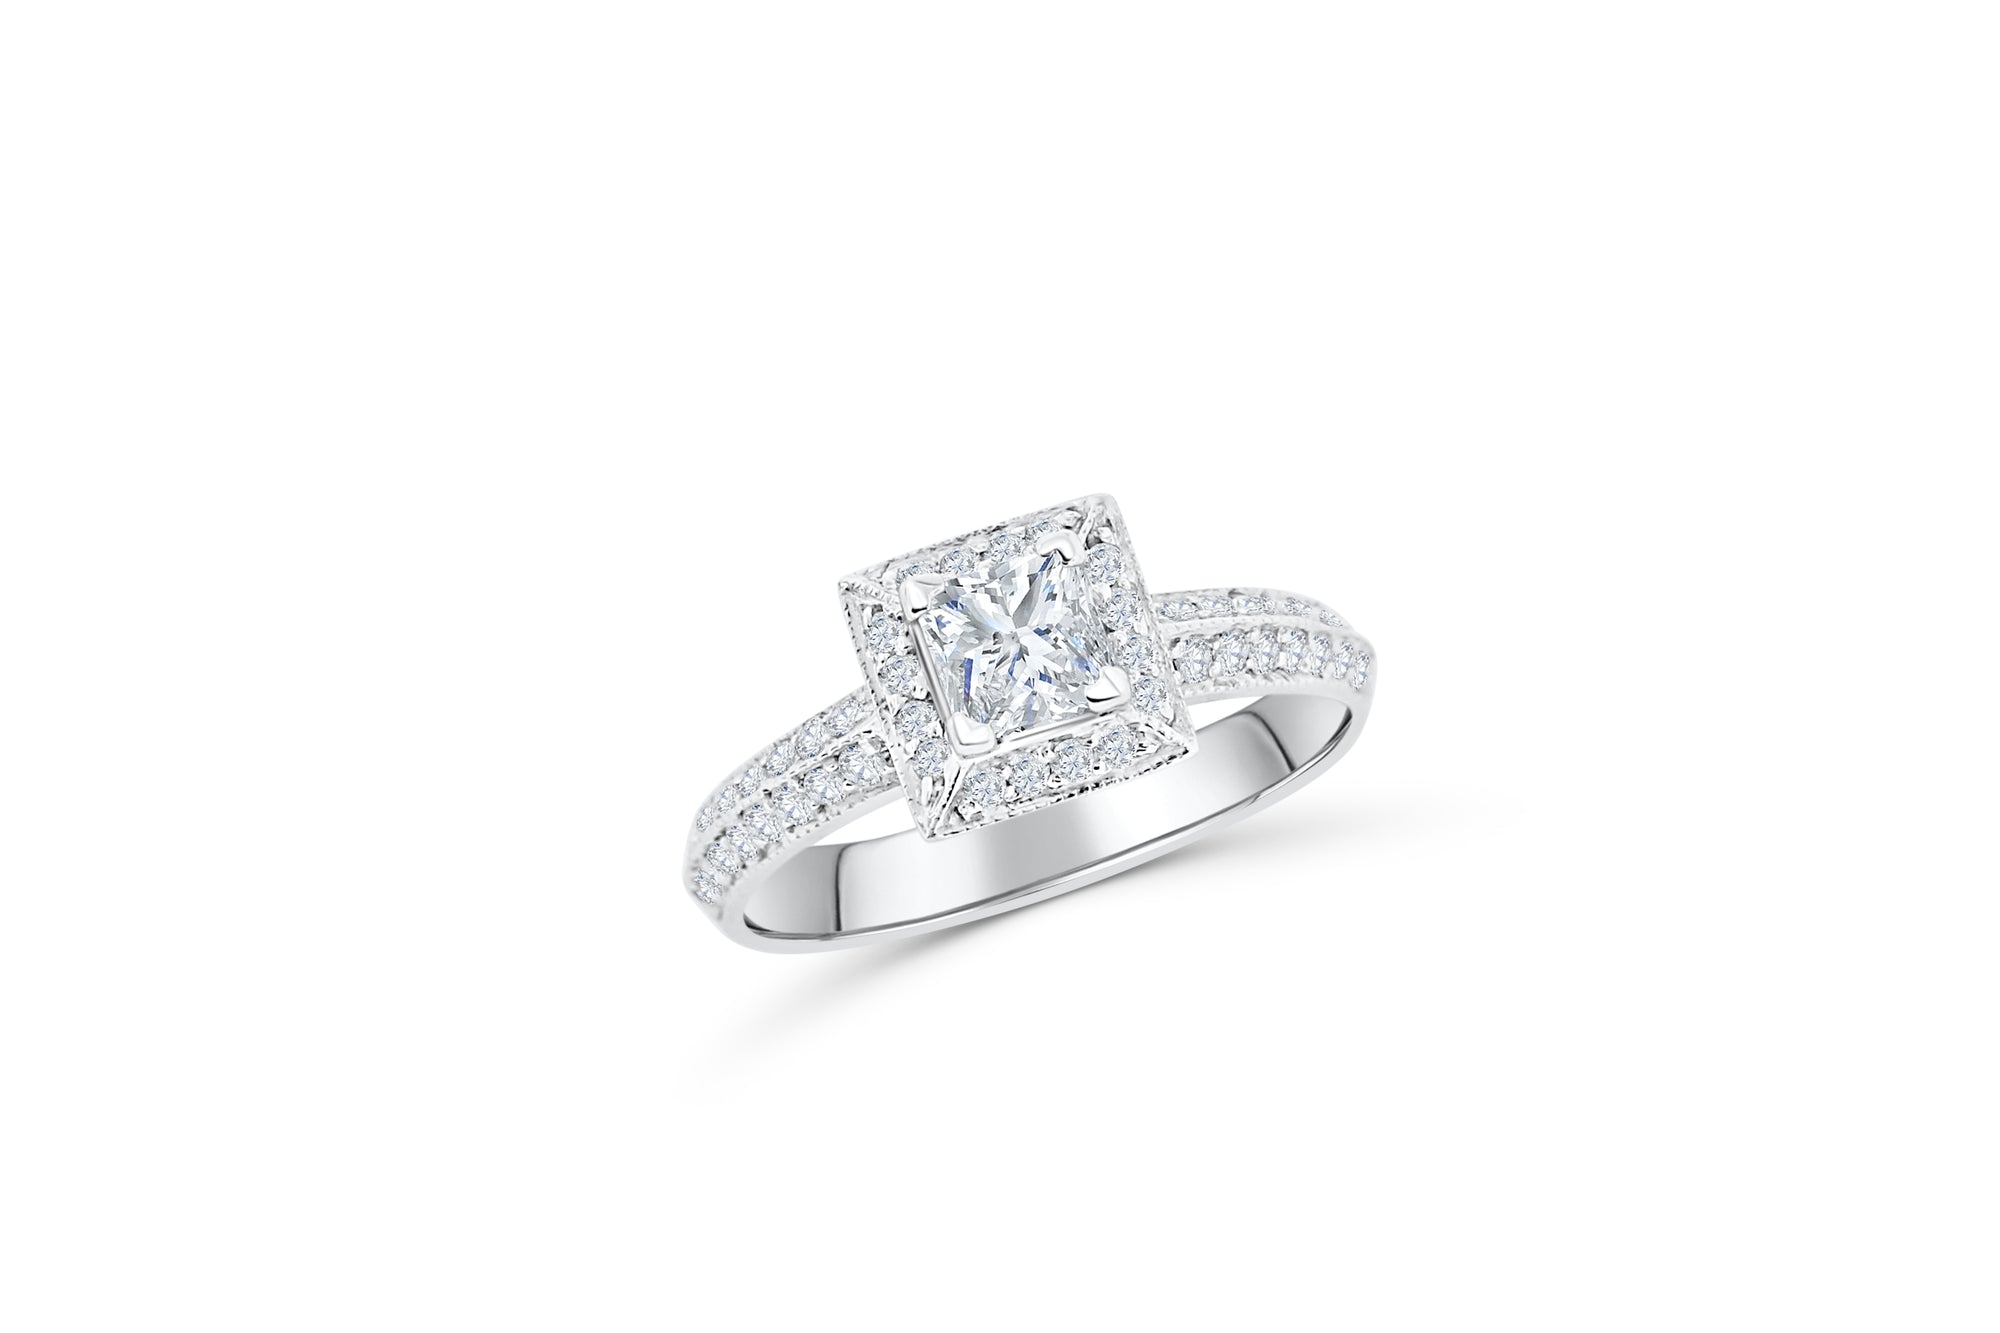 Princess Cut Diamond Engagement Ring 1.34 ct tw 14K White Gold DENG046 - NorthandSouthJewelry